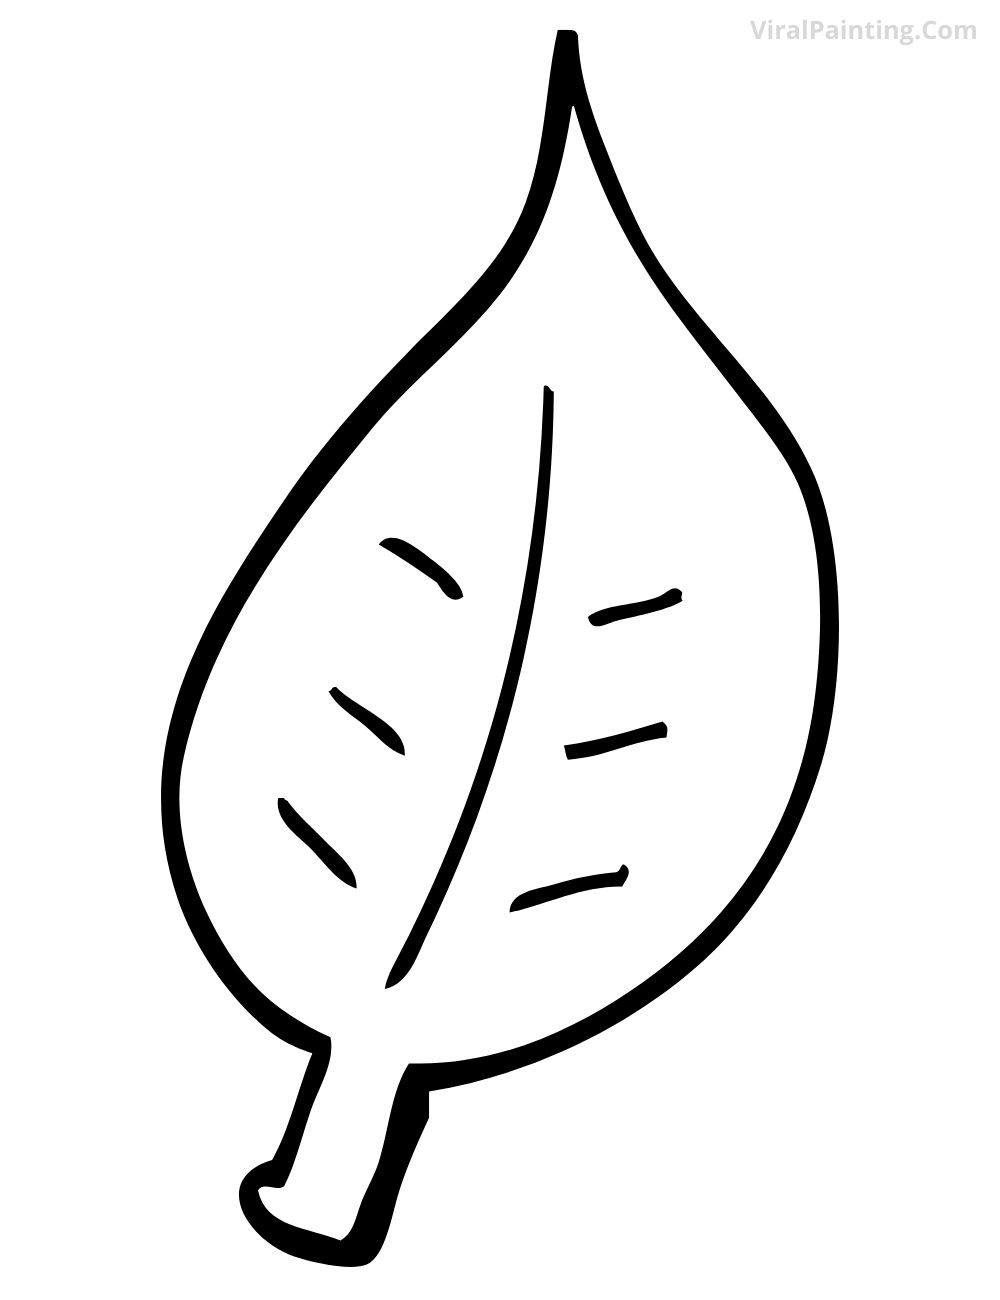 Leaf drawing ideas 2023 by viral painting 